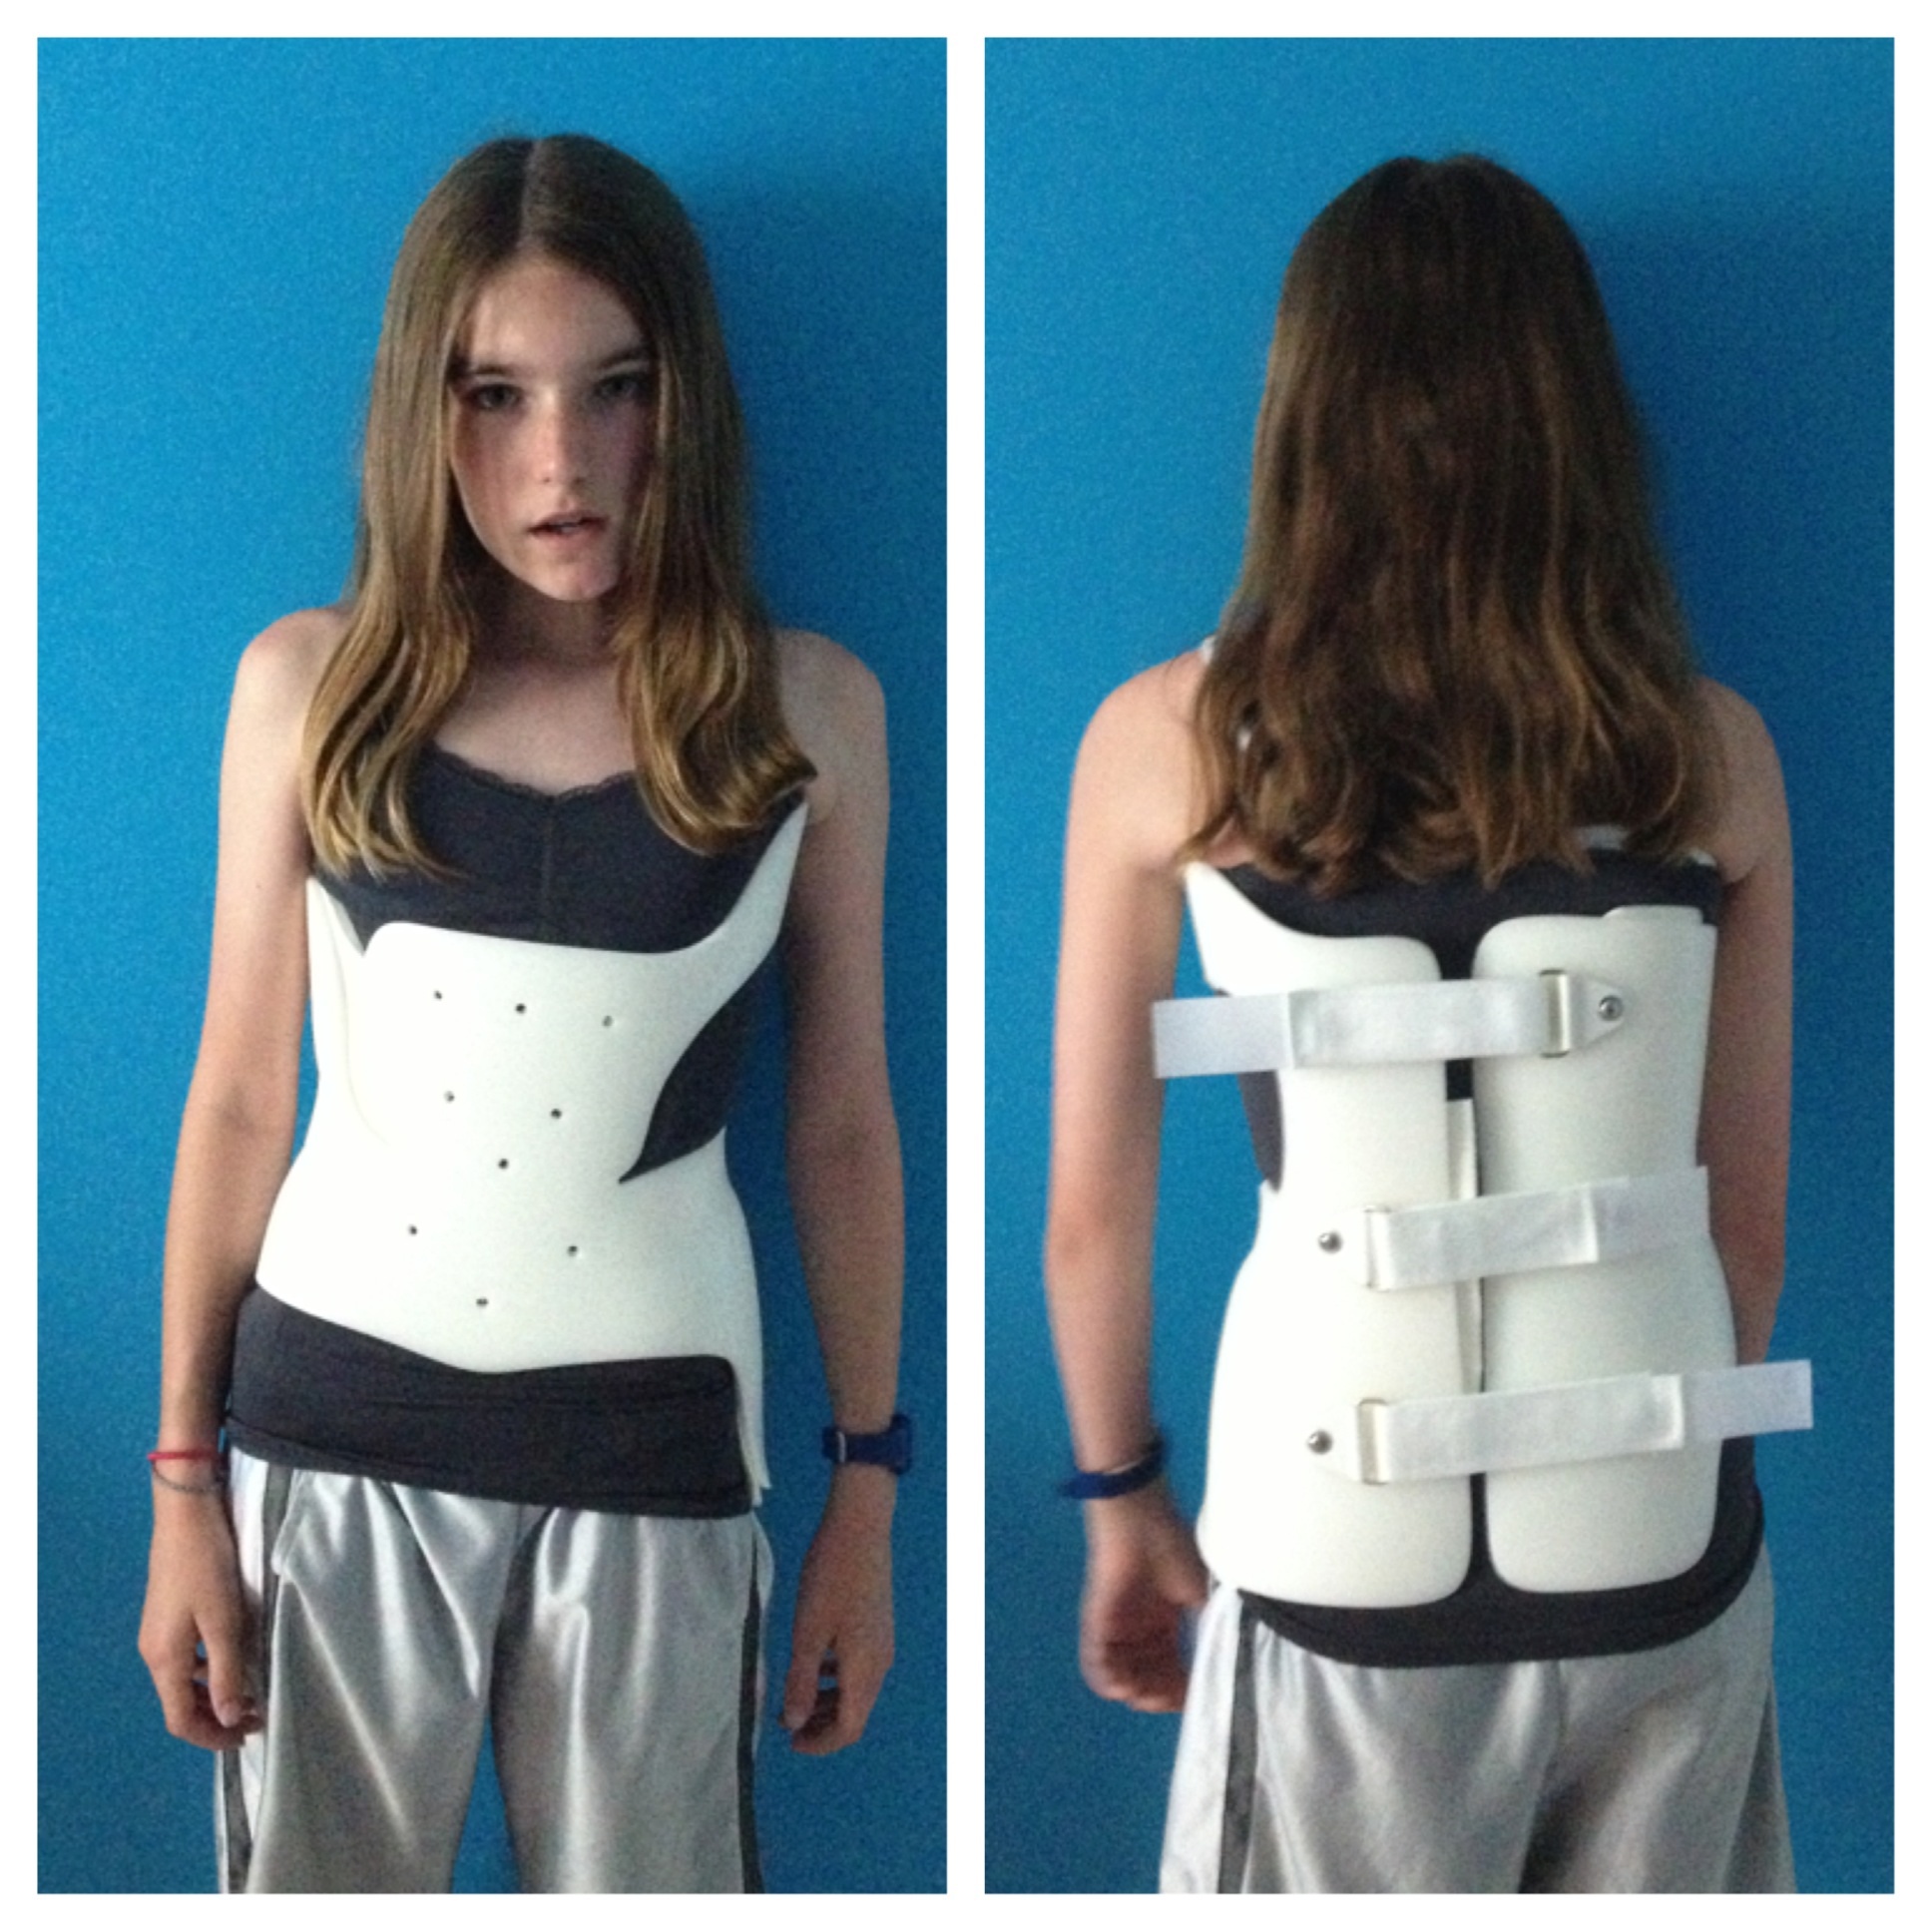 With a bad case of scoliosis she wore a brace like this for 3 years straight, 23 hours a day, from age 12 to 15. (Not actually her in the photo but the same type of brace she had)